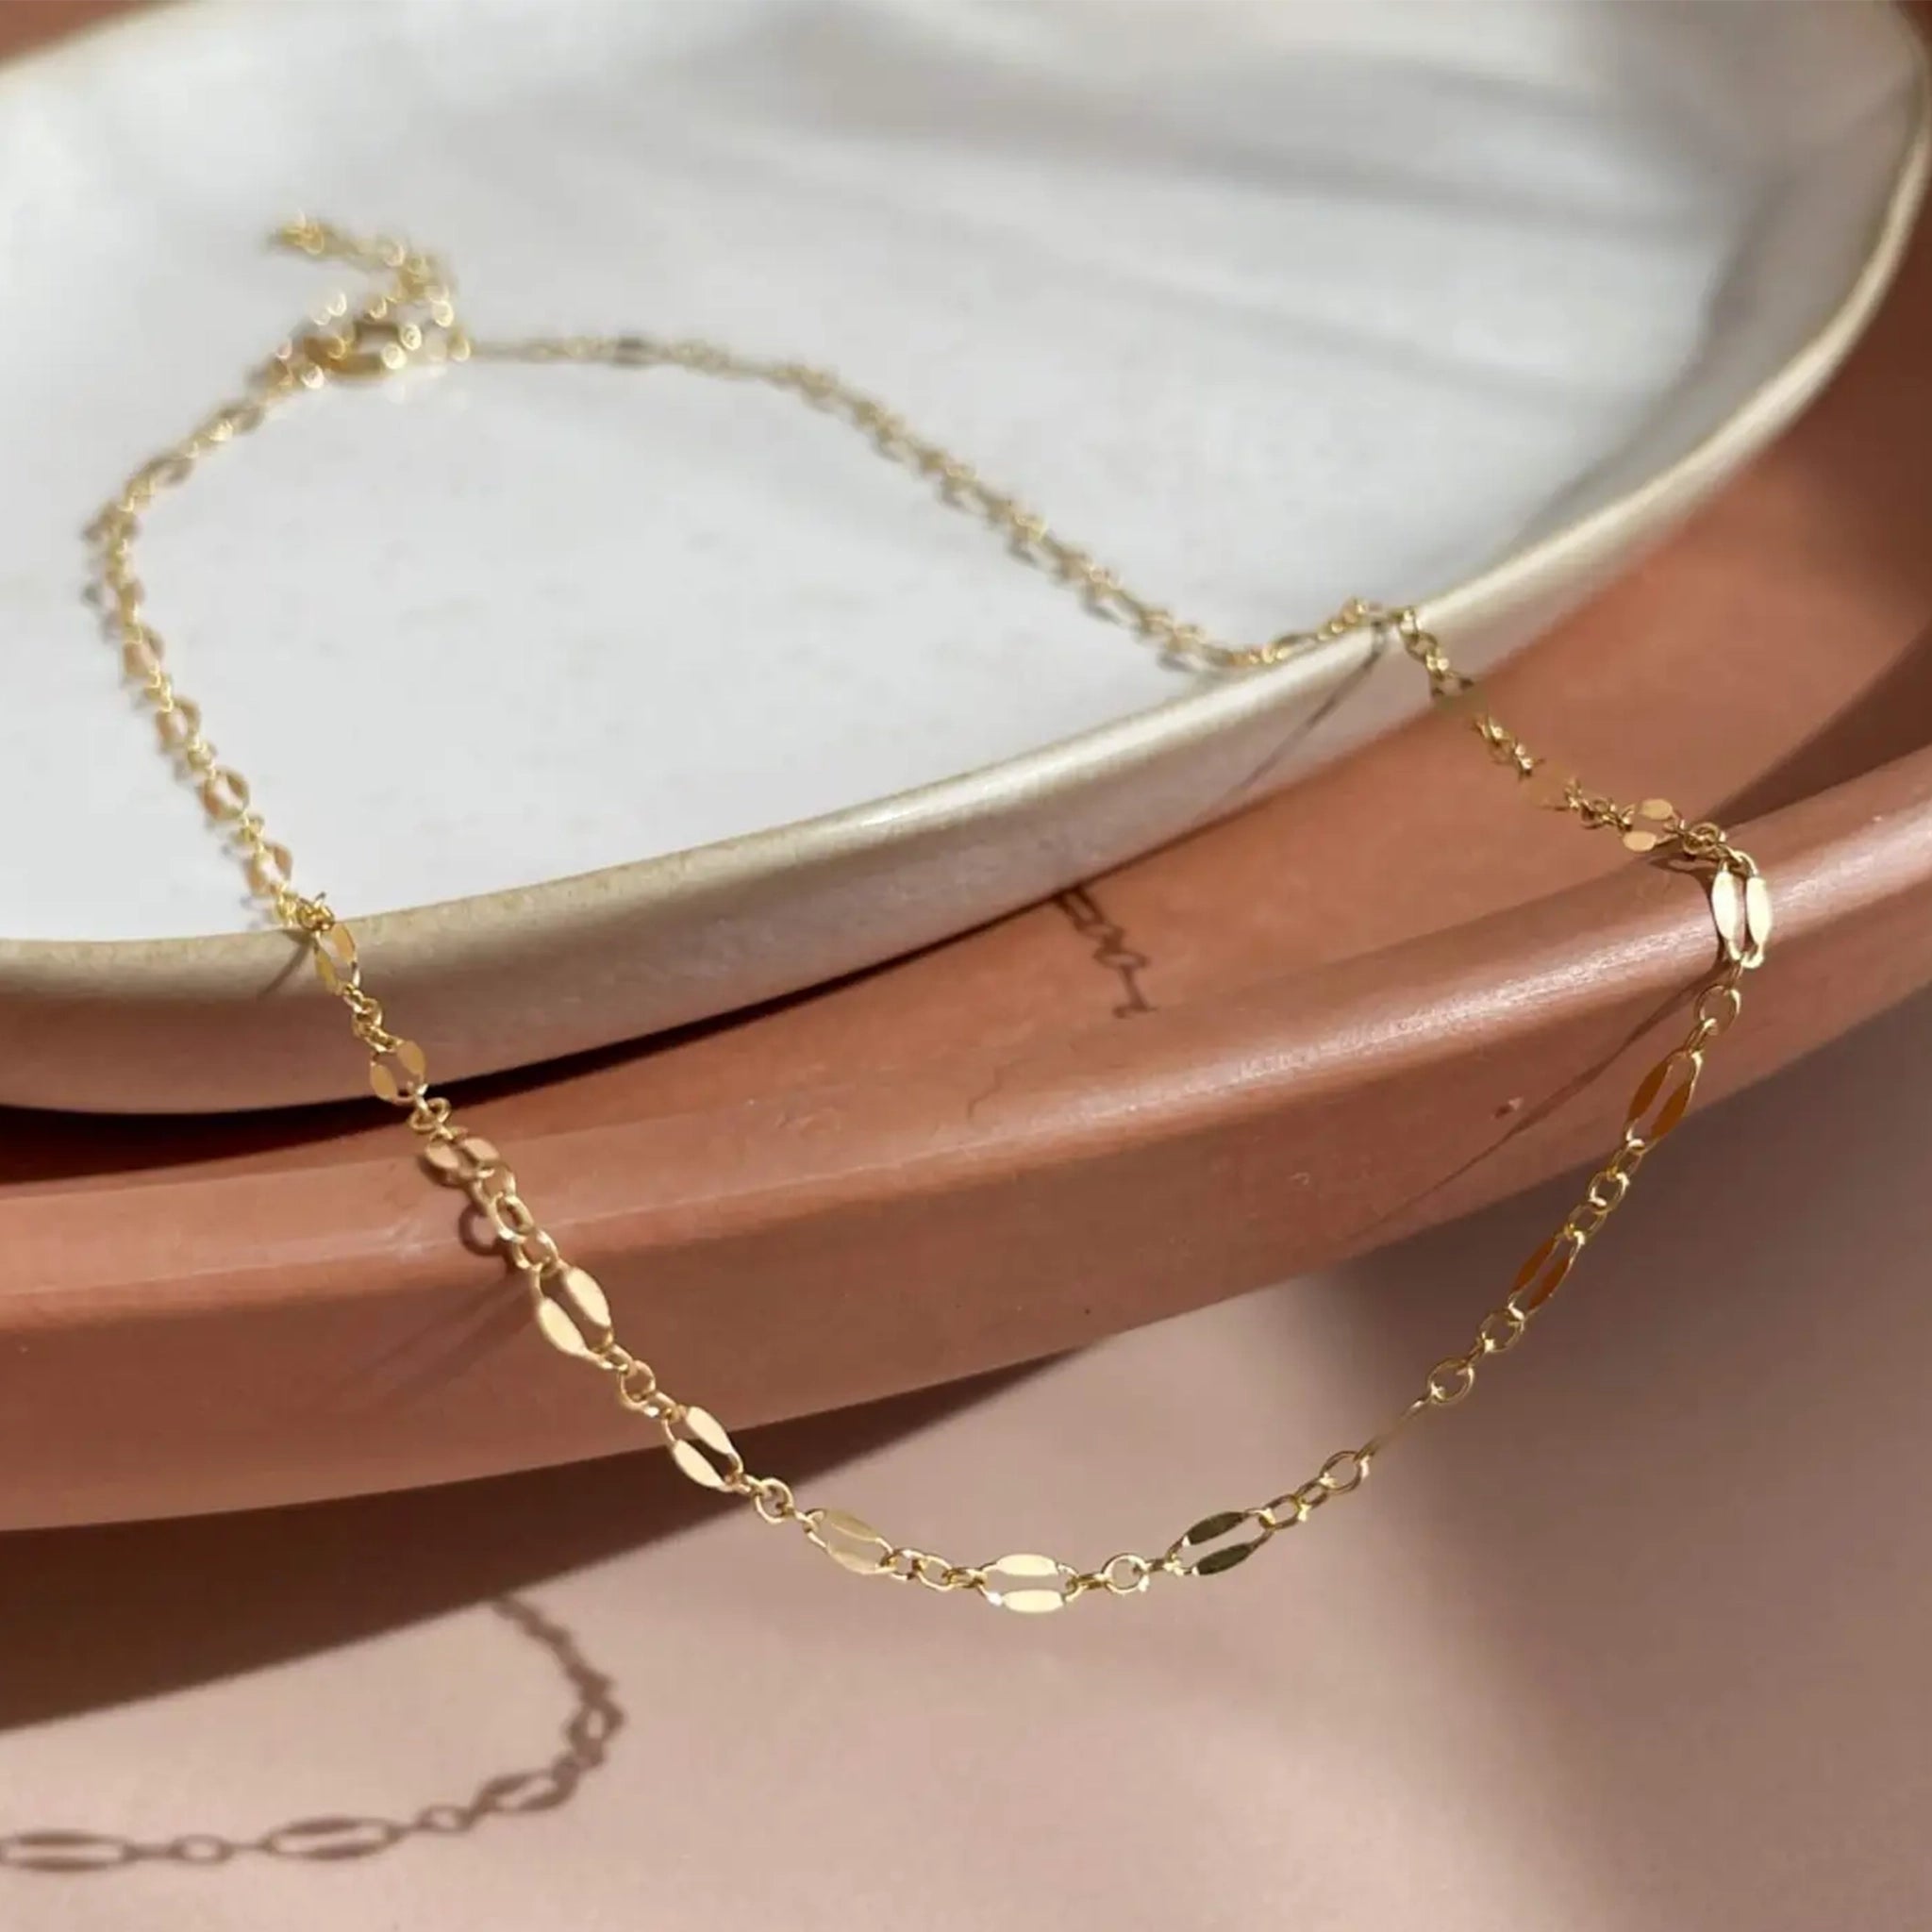 A gold chain choker necklace laying on a ceramic plate. 